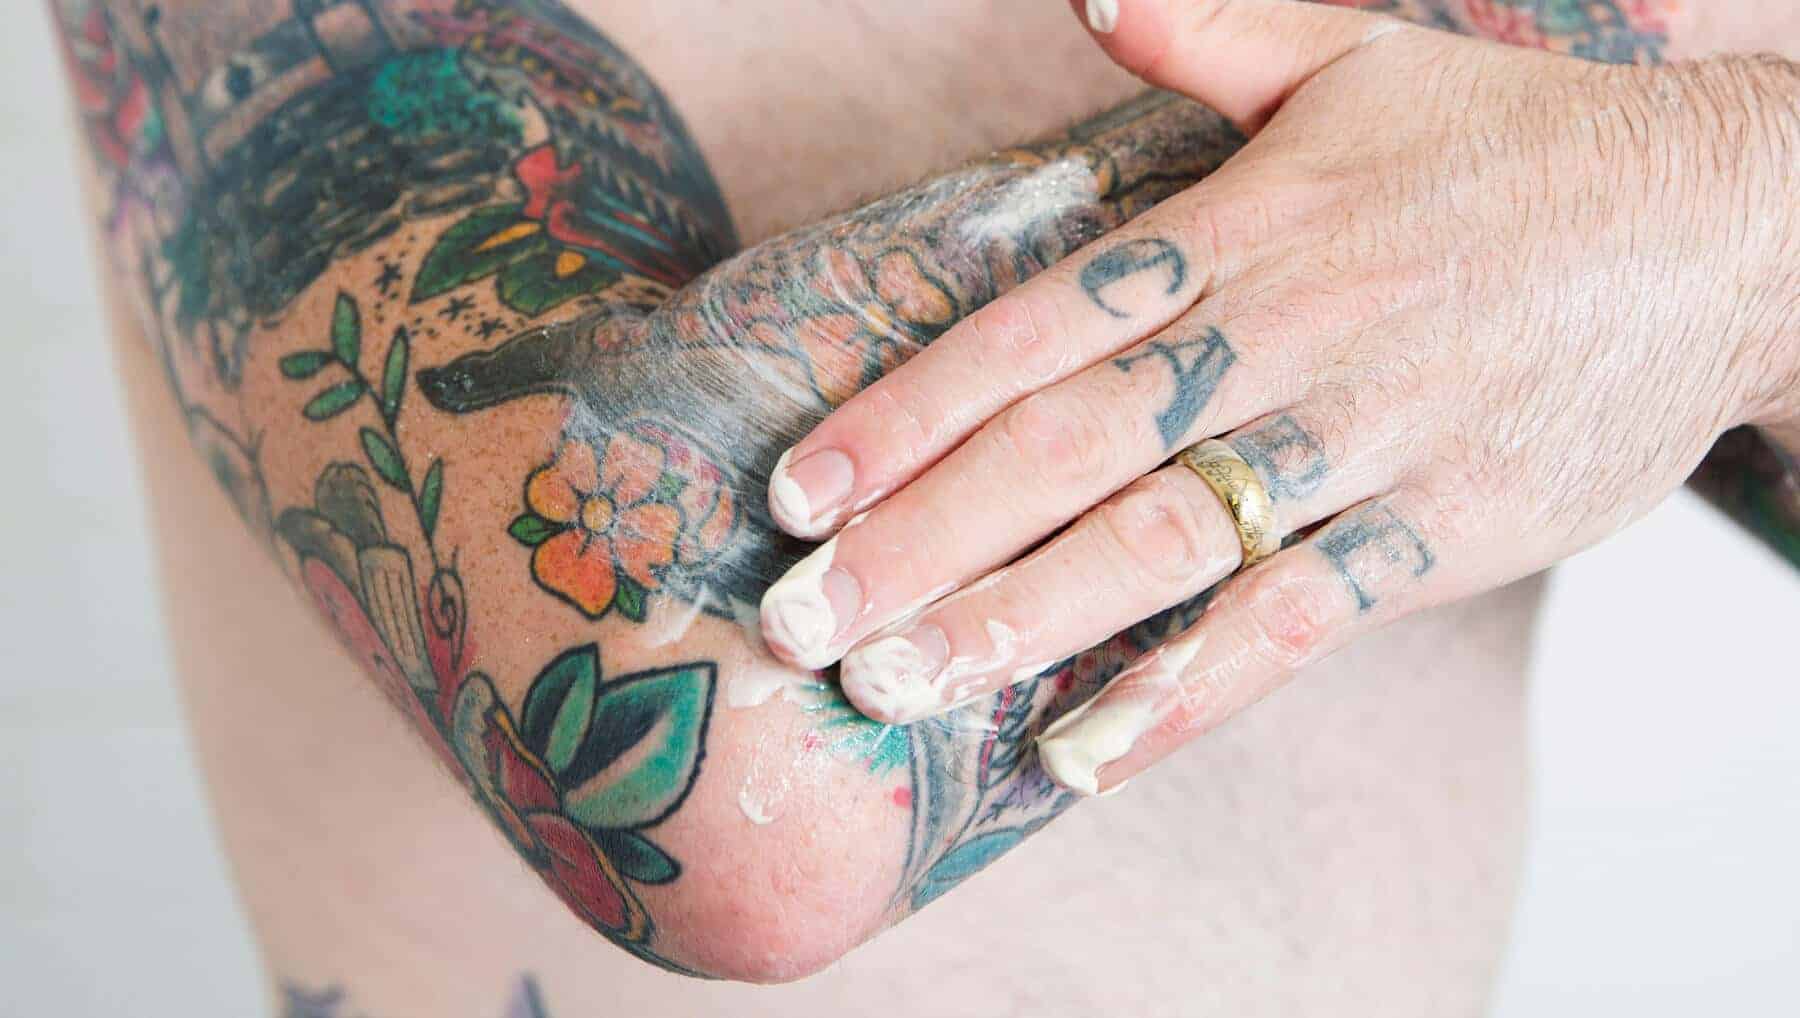 How To Take Care of a New Tattoo in the First Days | Tattoos Spot